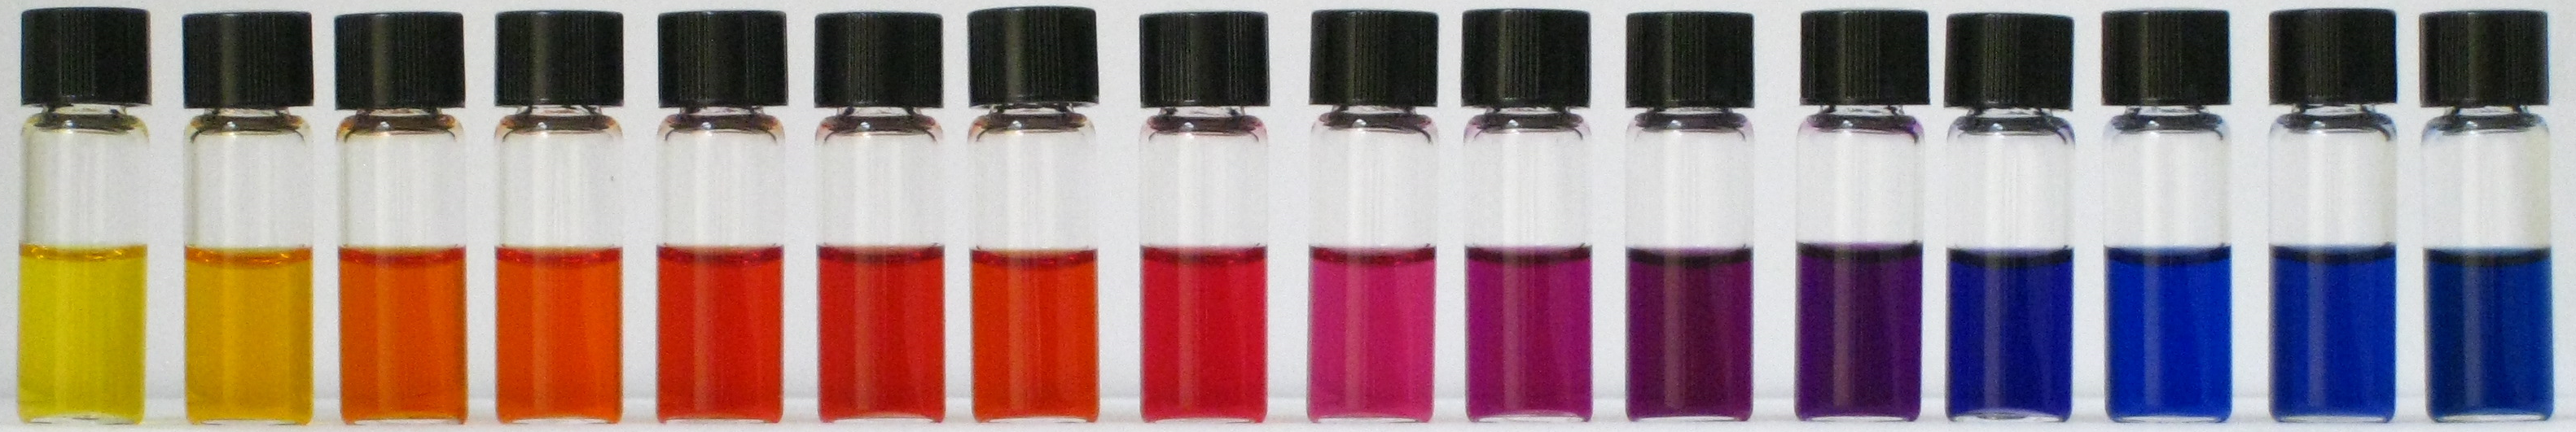 Palette of fluorinated voltage sensitive dyes from Potentiometric Probes